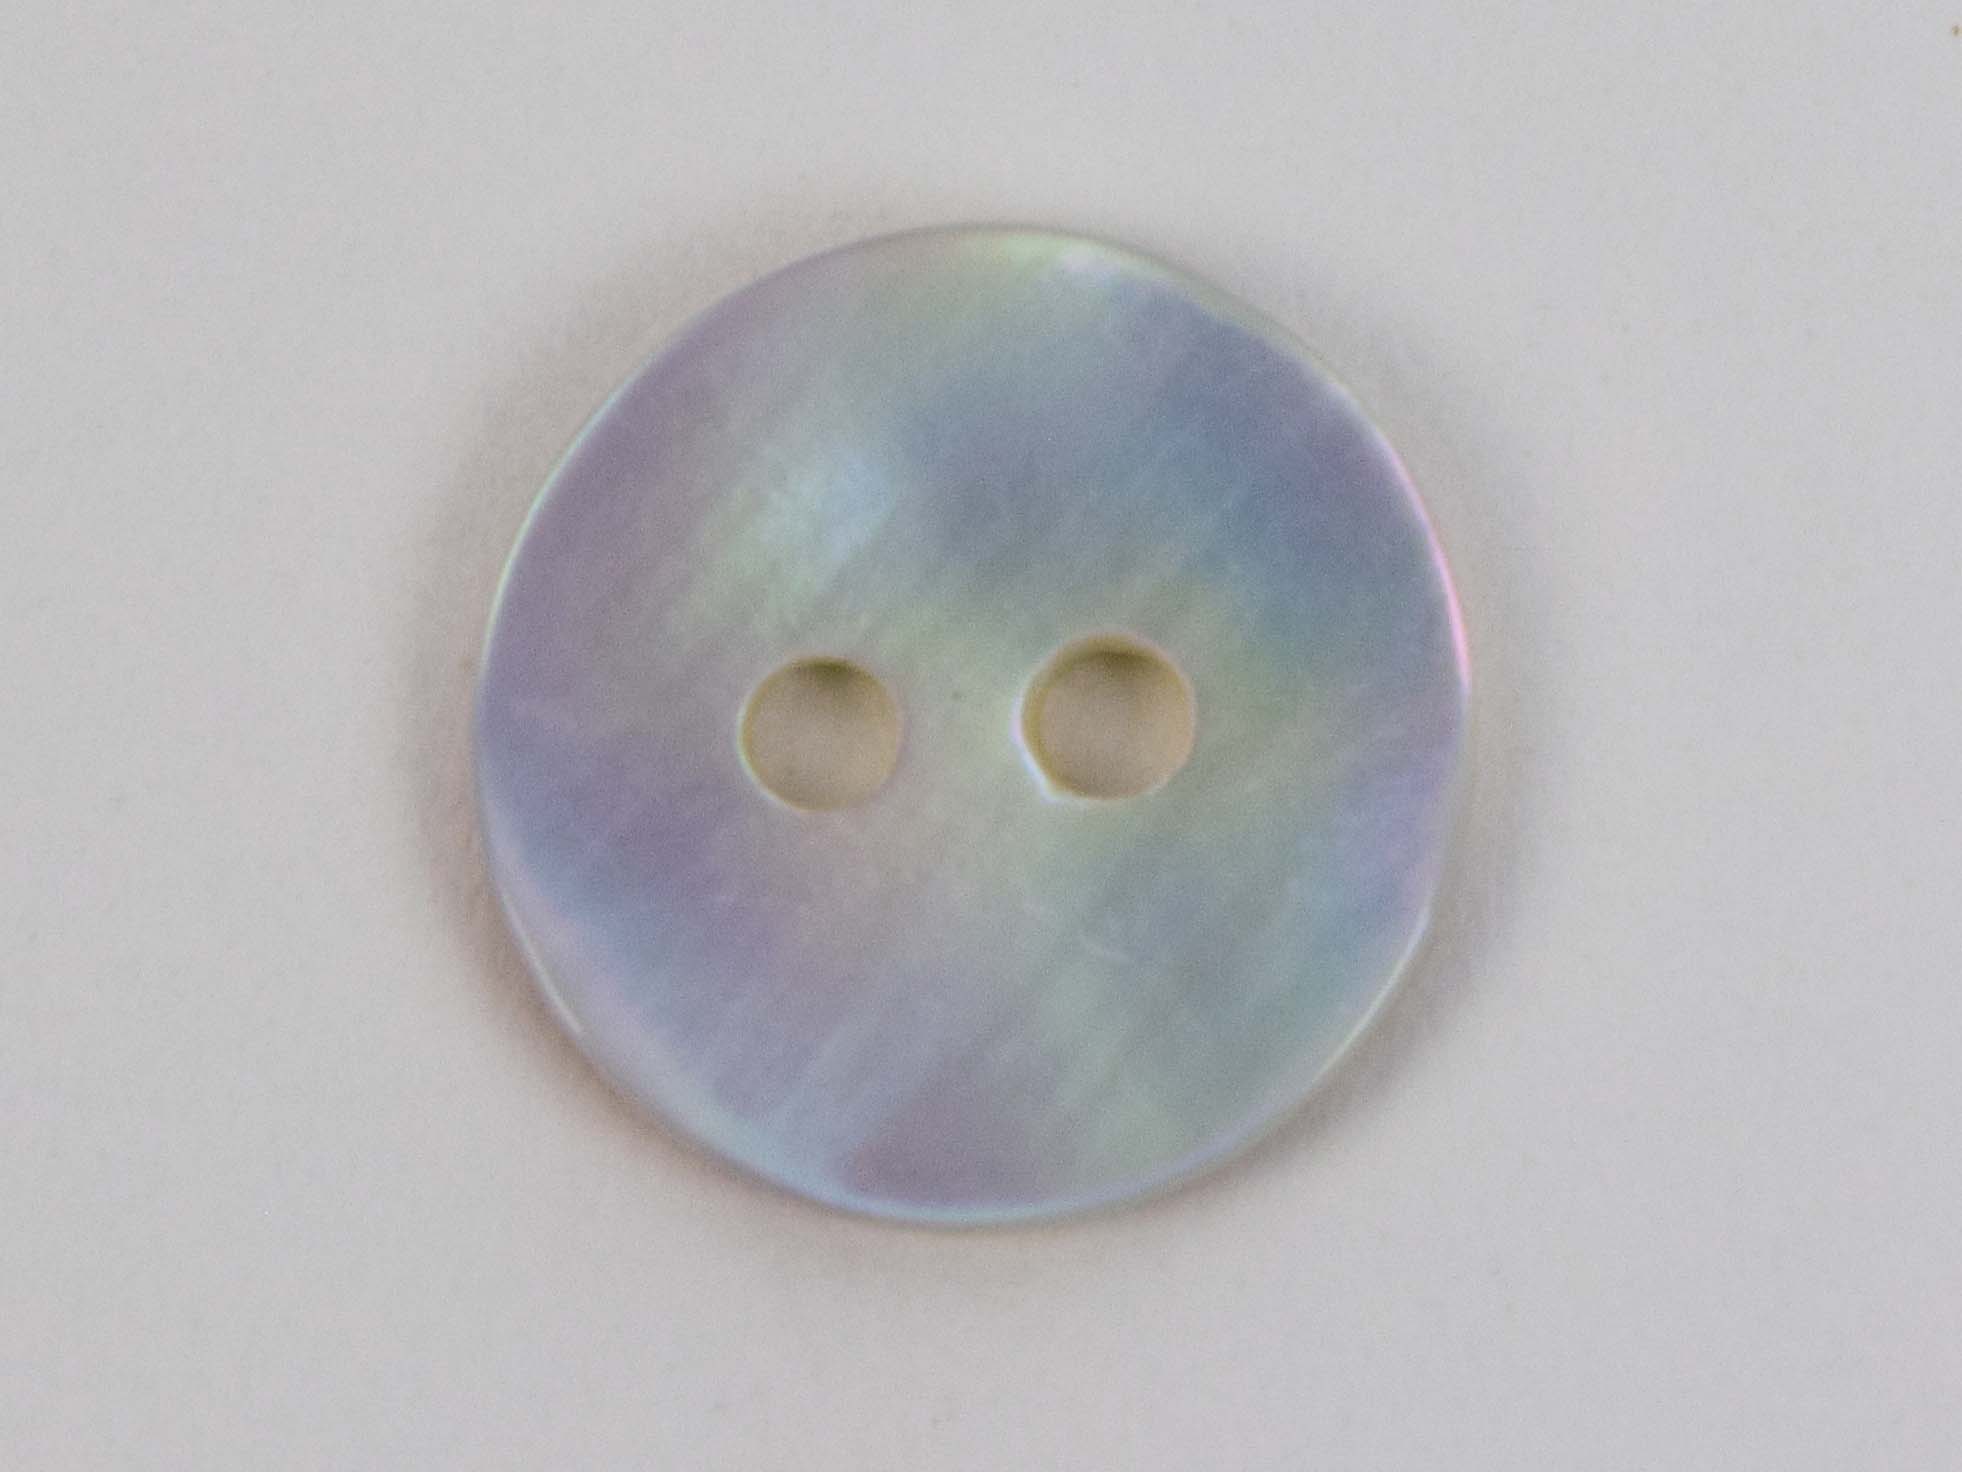 Freshwater Mother Of Pearl Button: 18L (11.6mm or 0.457") 